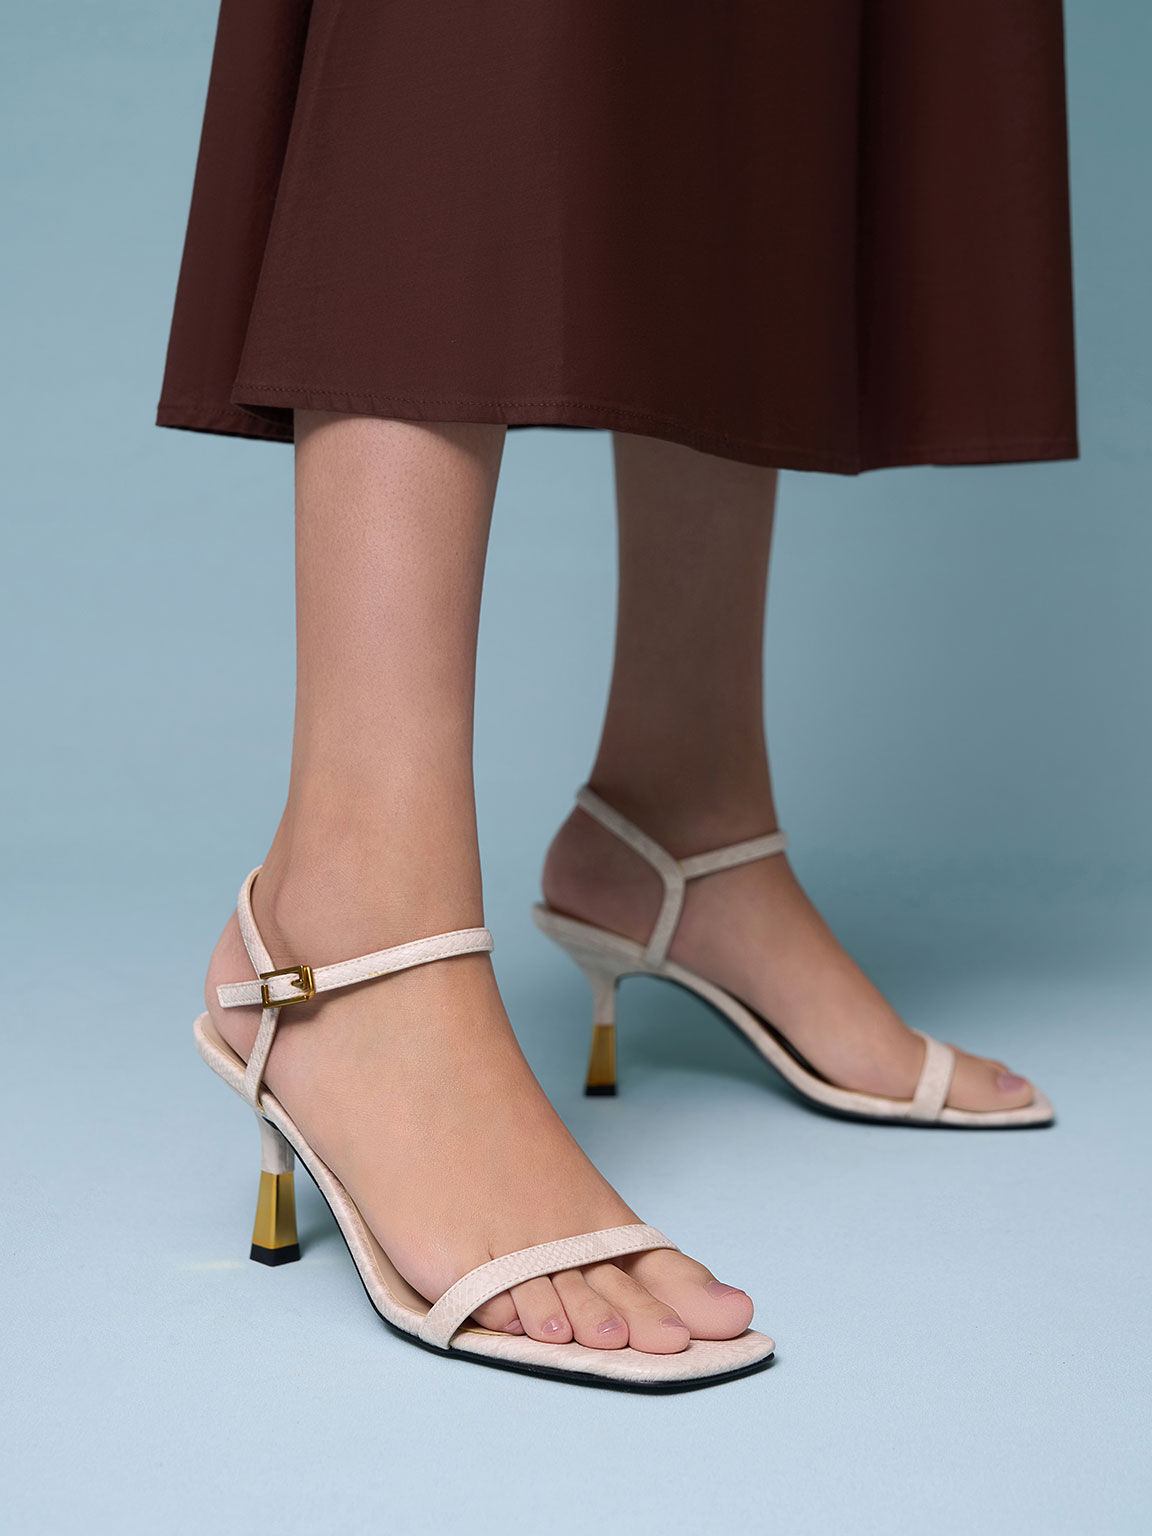 Off White Leather-Look Strappy Block Heel Sandals | New Look